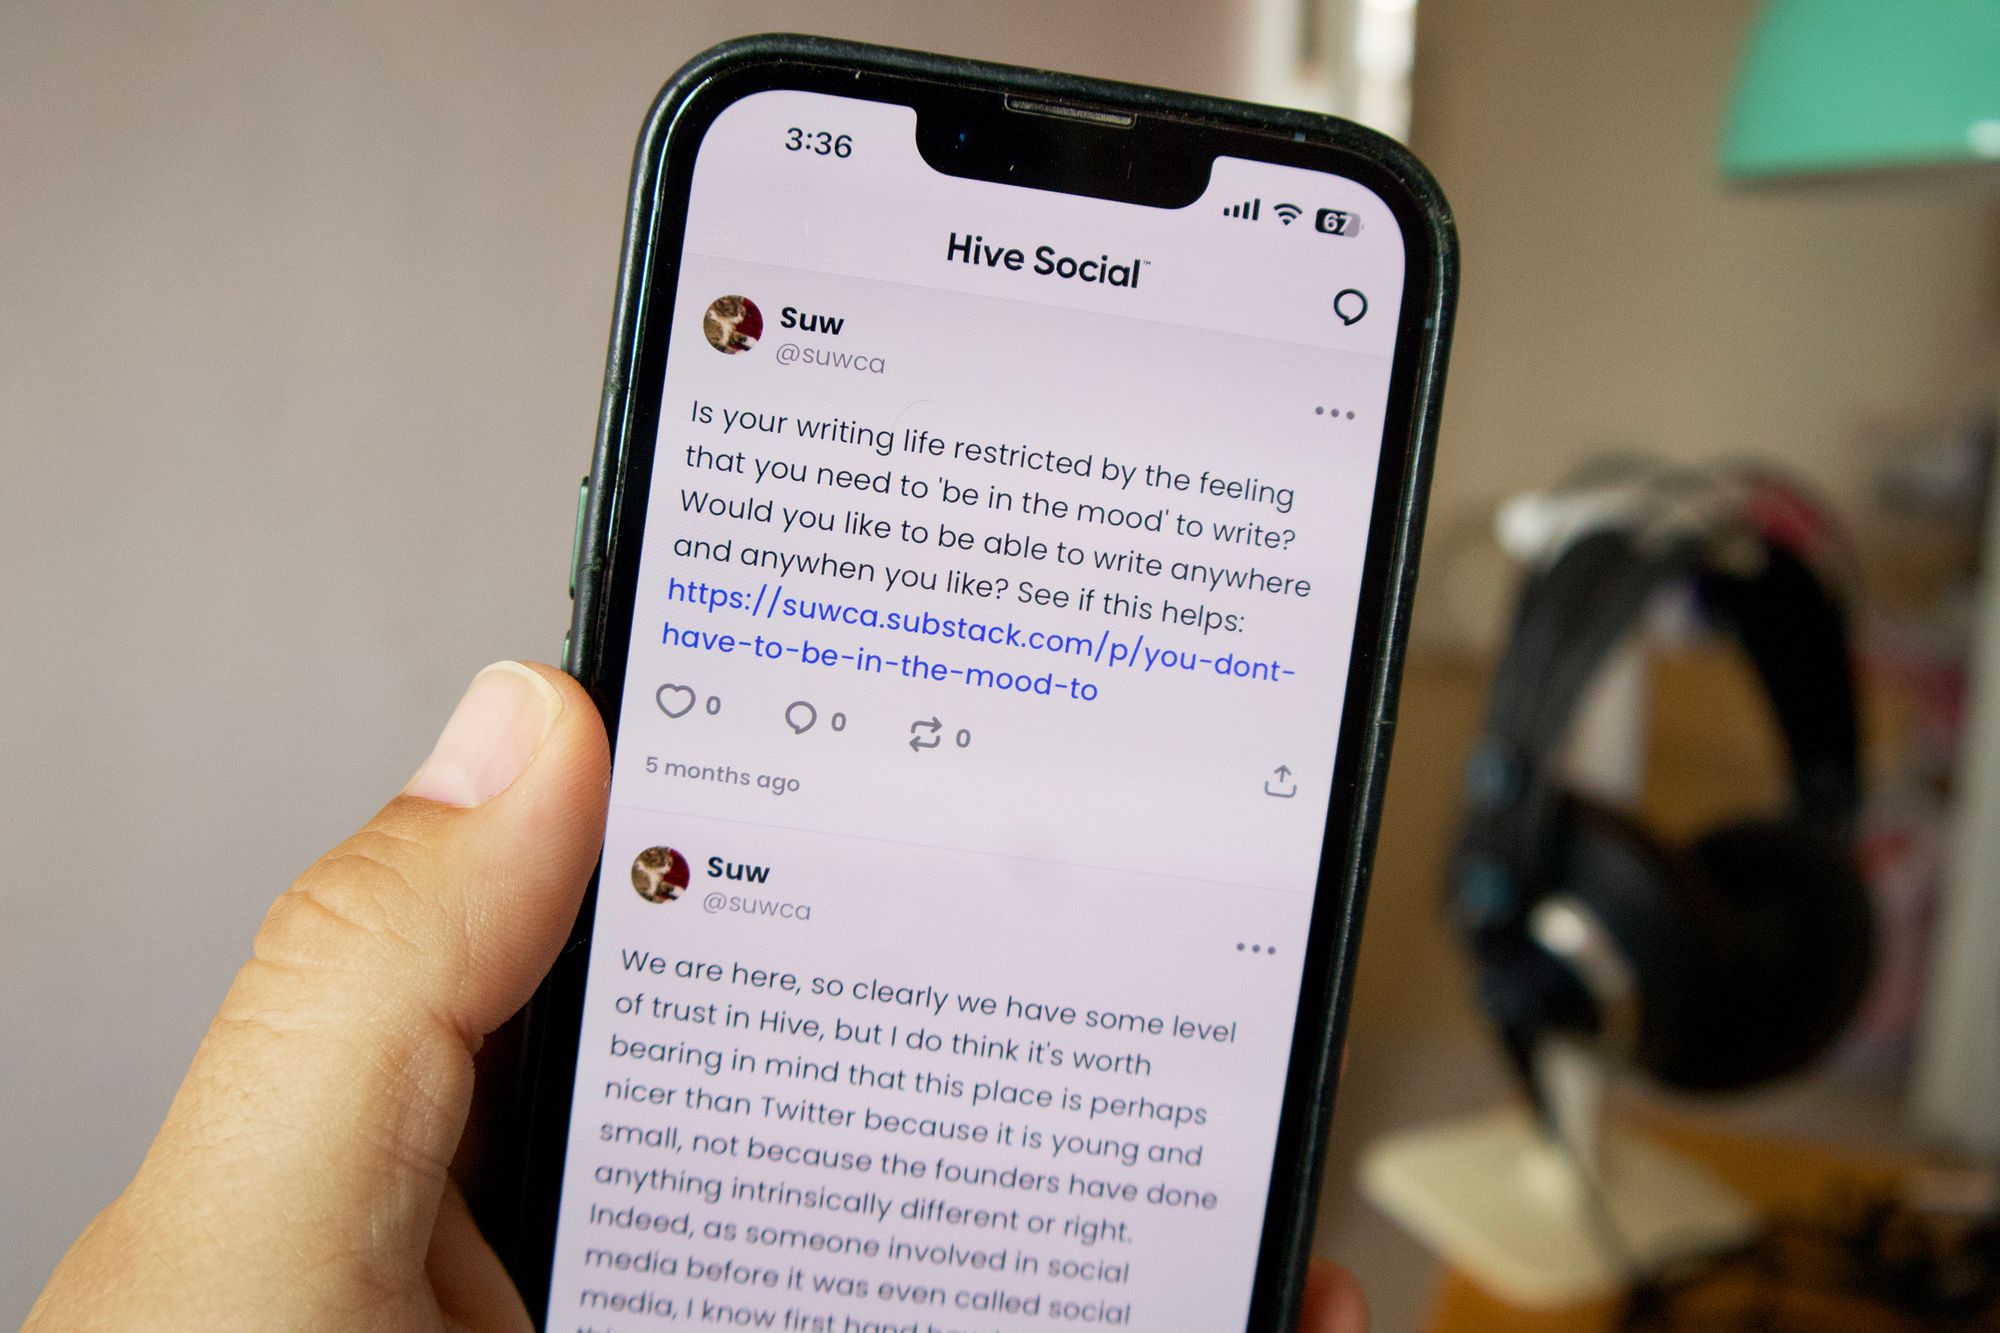 Hive Social on an iPhone